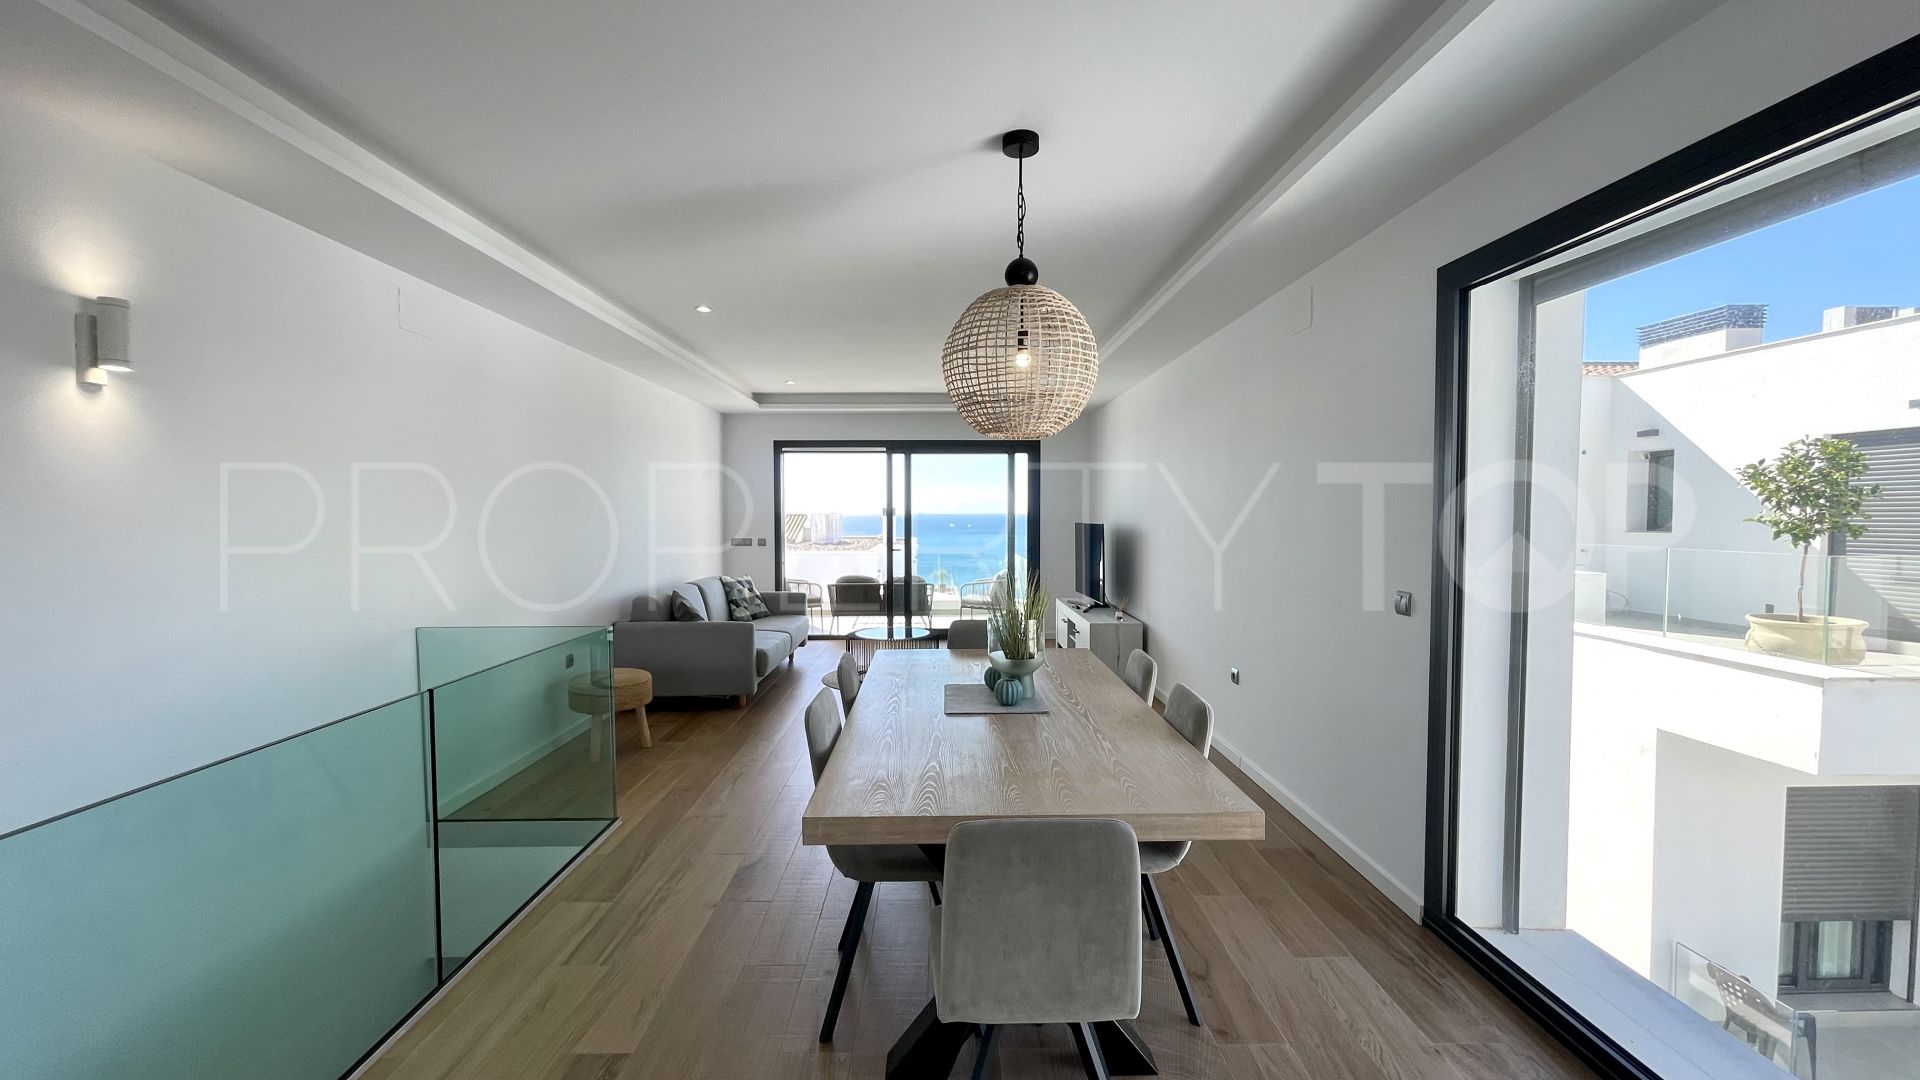 For sale apartment in Alcaidesa with 2 bedrooms